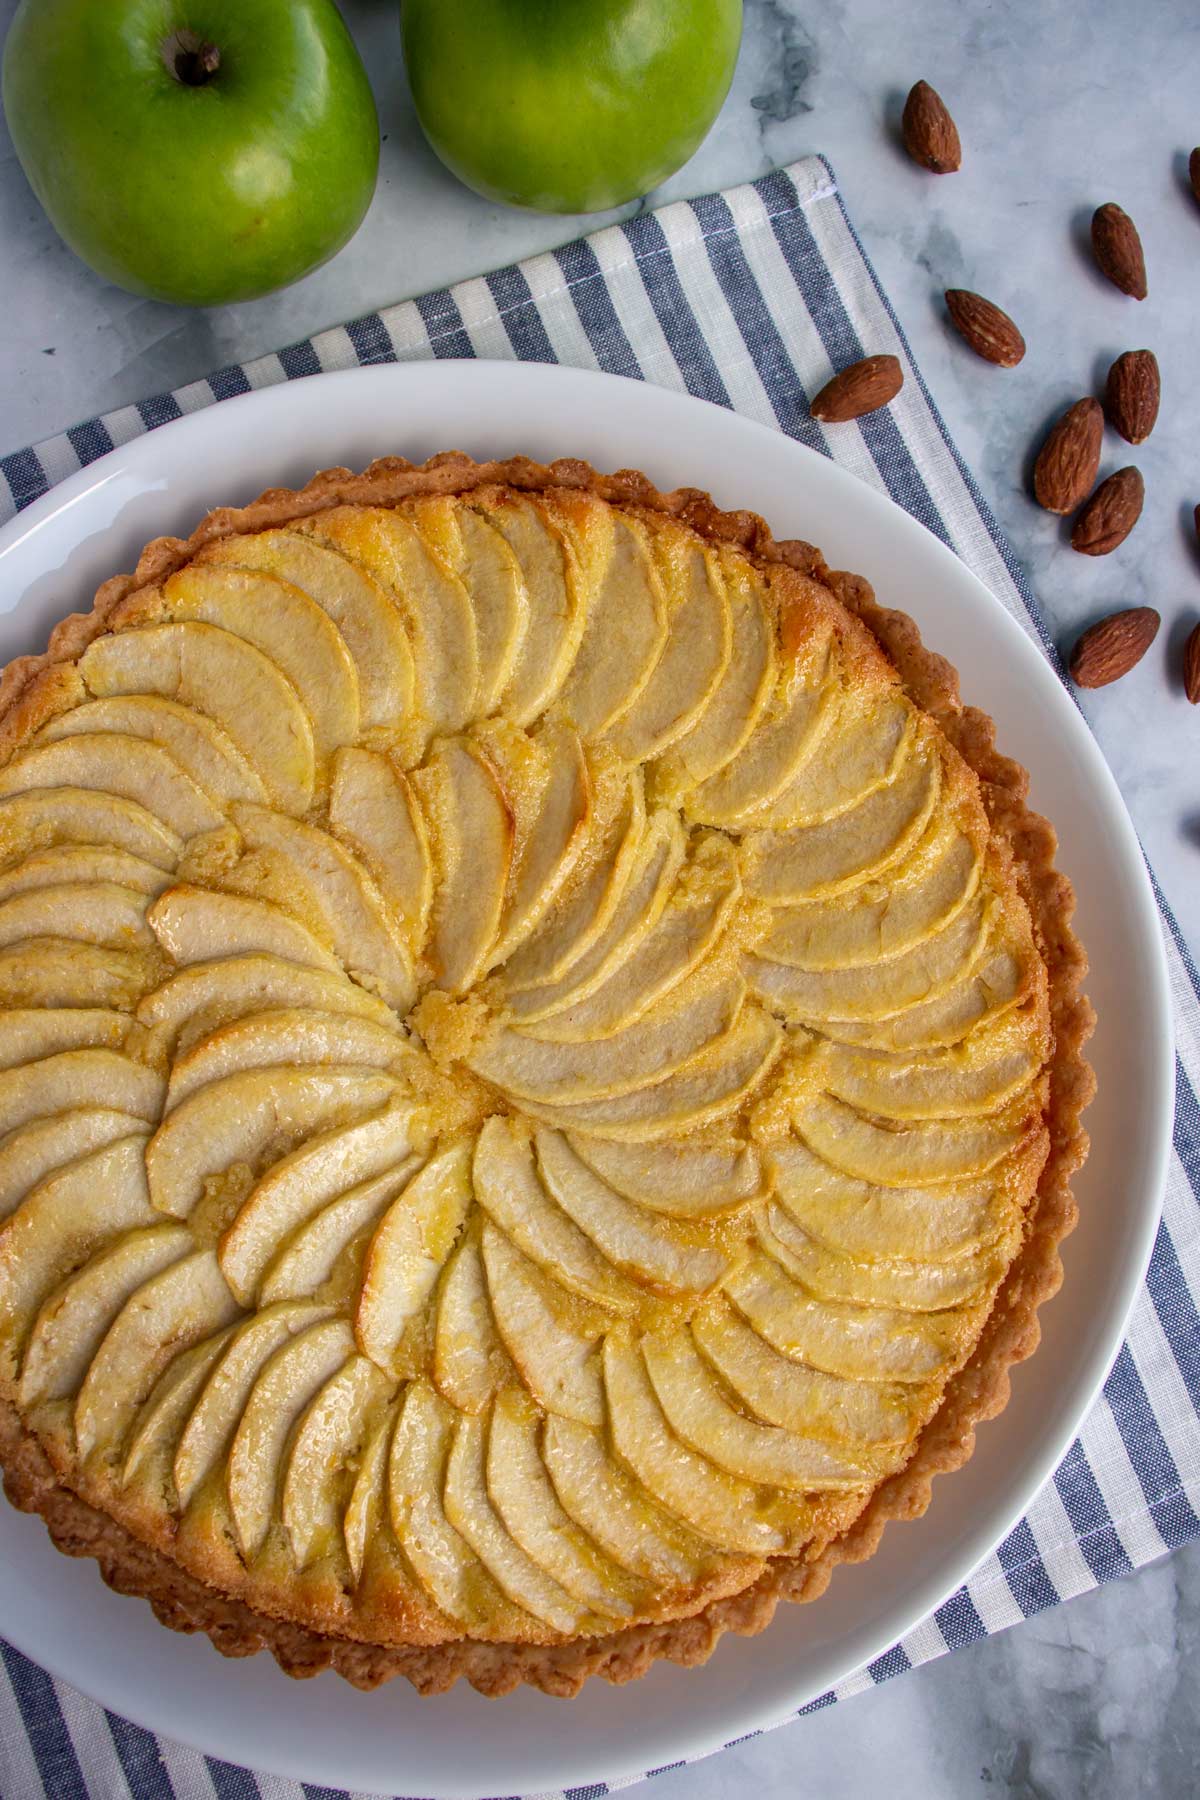 A French apple tart on a striped cloth napkin with almonds and apples.